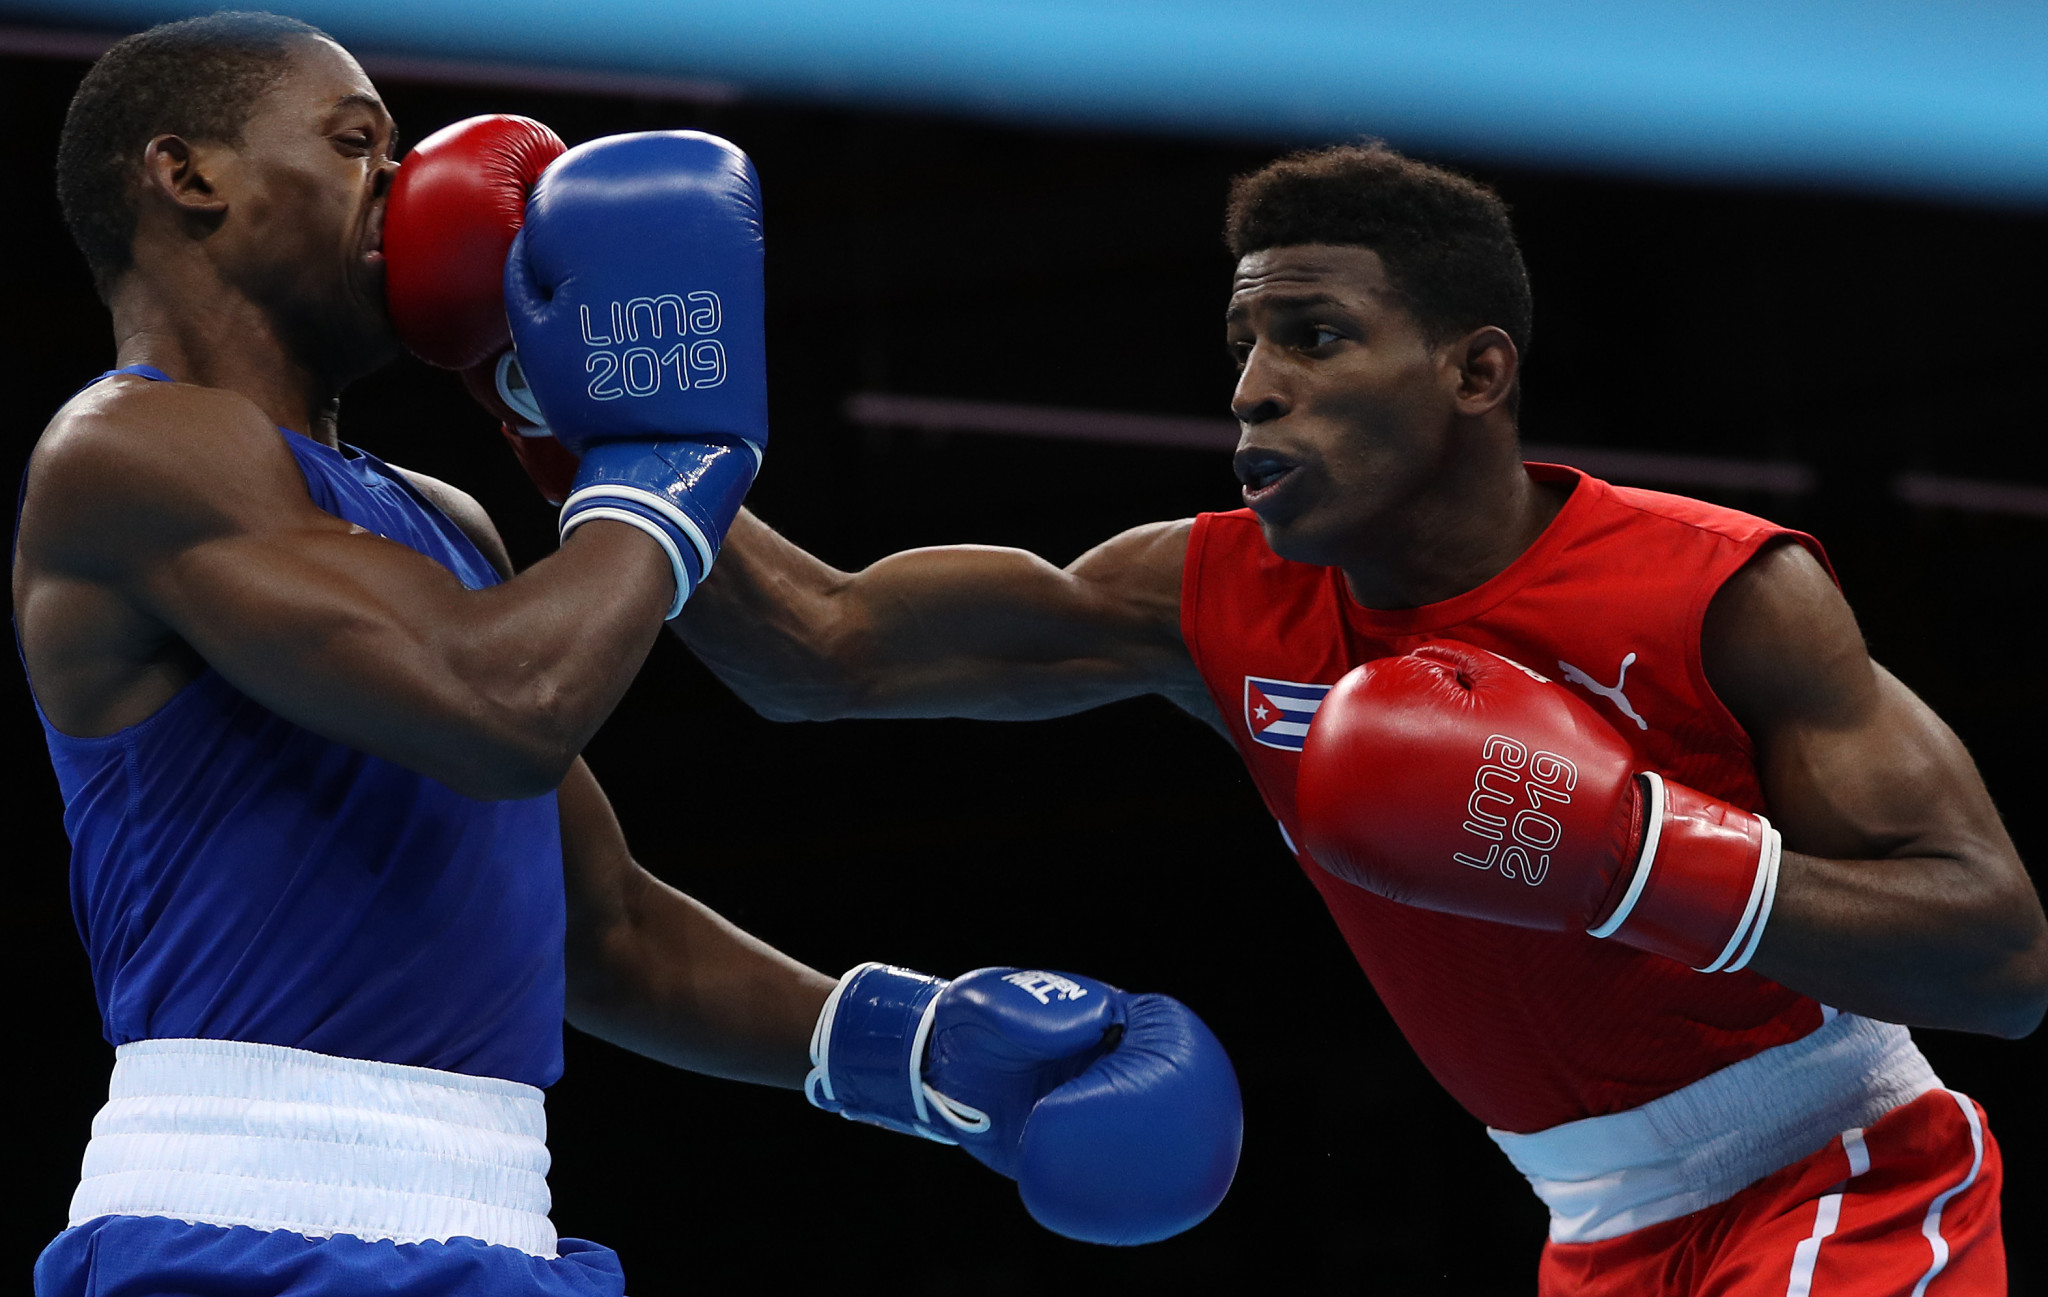 Cuban Boxers Attend Training Camp In Preparation For Olympic Qualifier from...